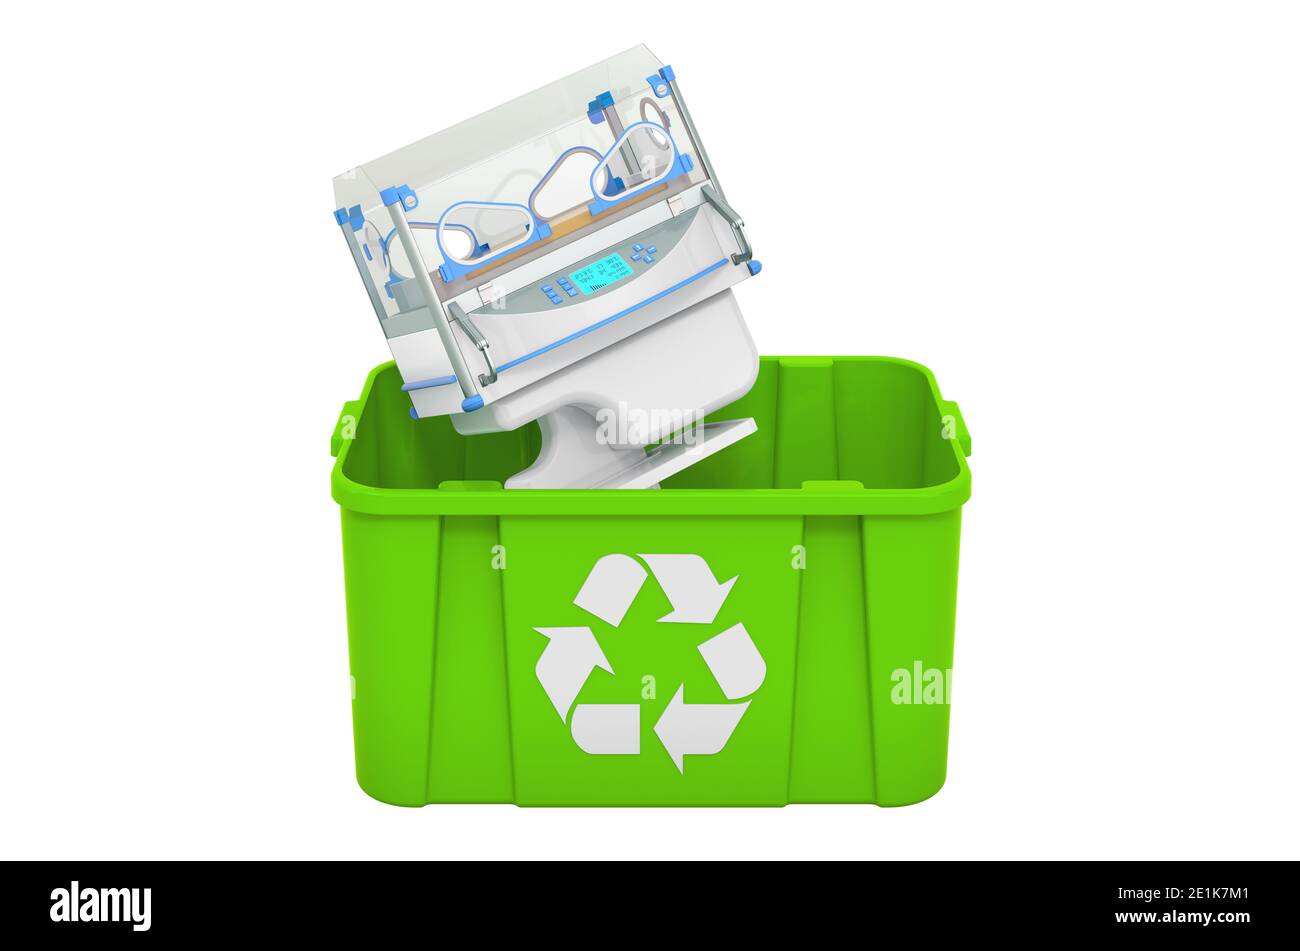 https://c8.alamy.com/comp/2E1K7M1/recycling-trashcan-with-neonatal-incubator-3d-rendering-isolated-on-white-background-2E1K7M1.jpg